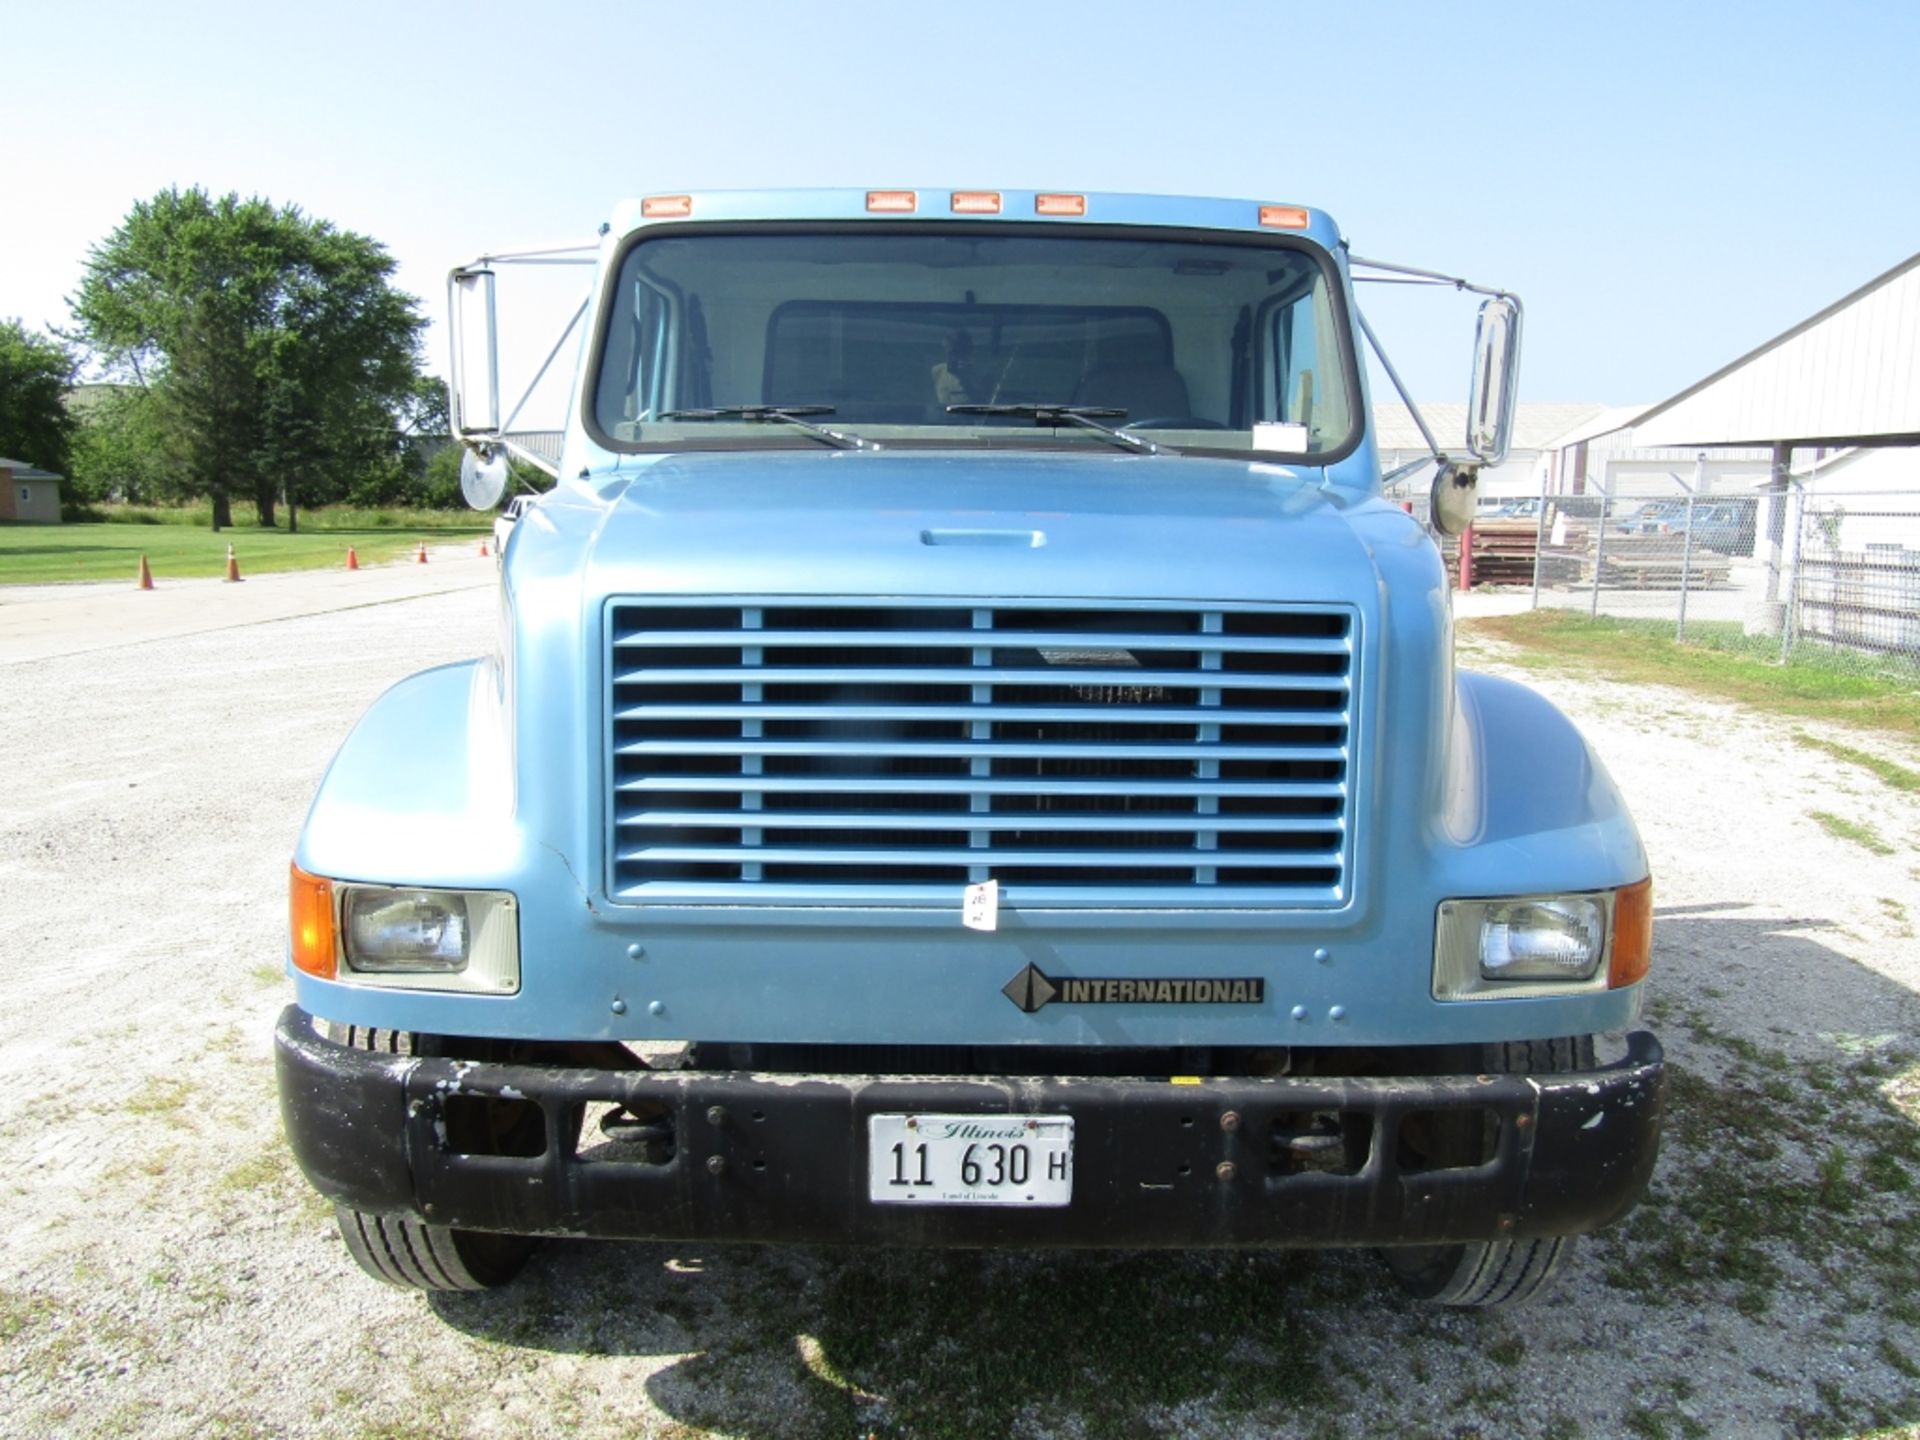 1999 International 4700 DT466E Flat Bed Truck, Model 4170, Dually, VIN #1HTSCAAM3XH607743, 276623 - Image 3 of 26